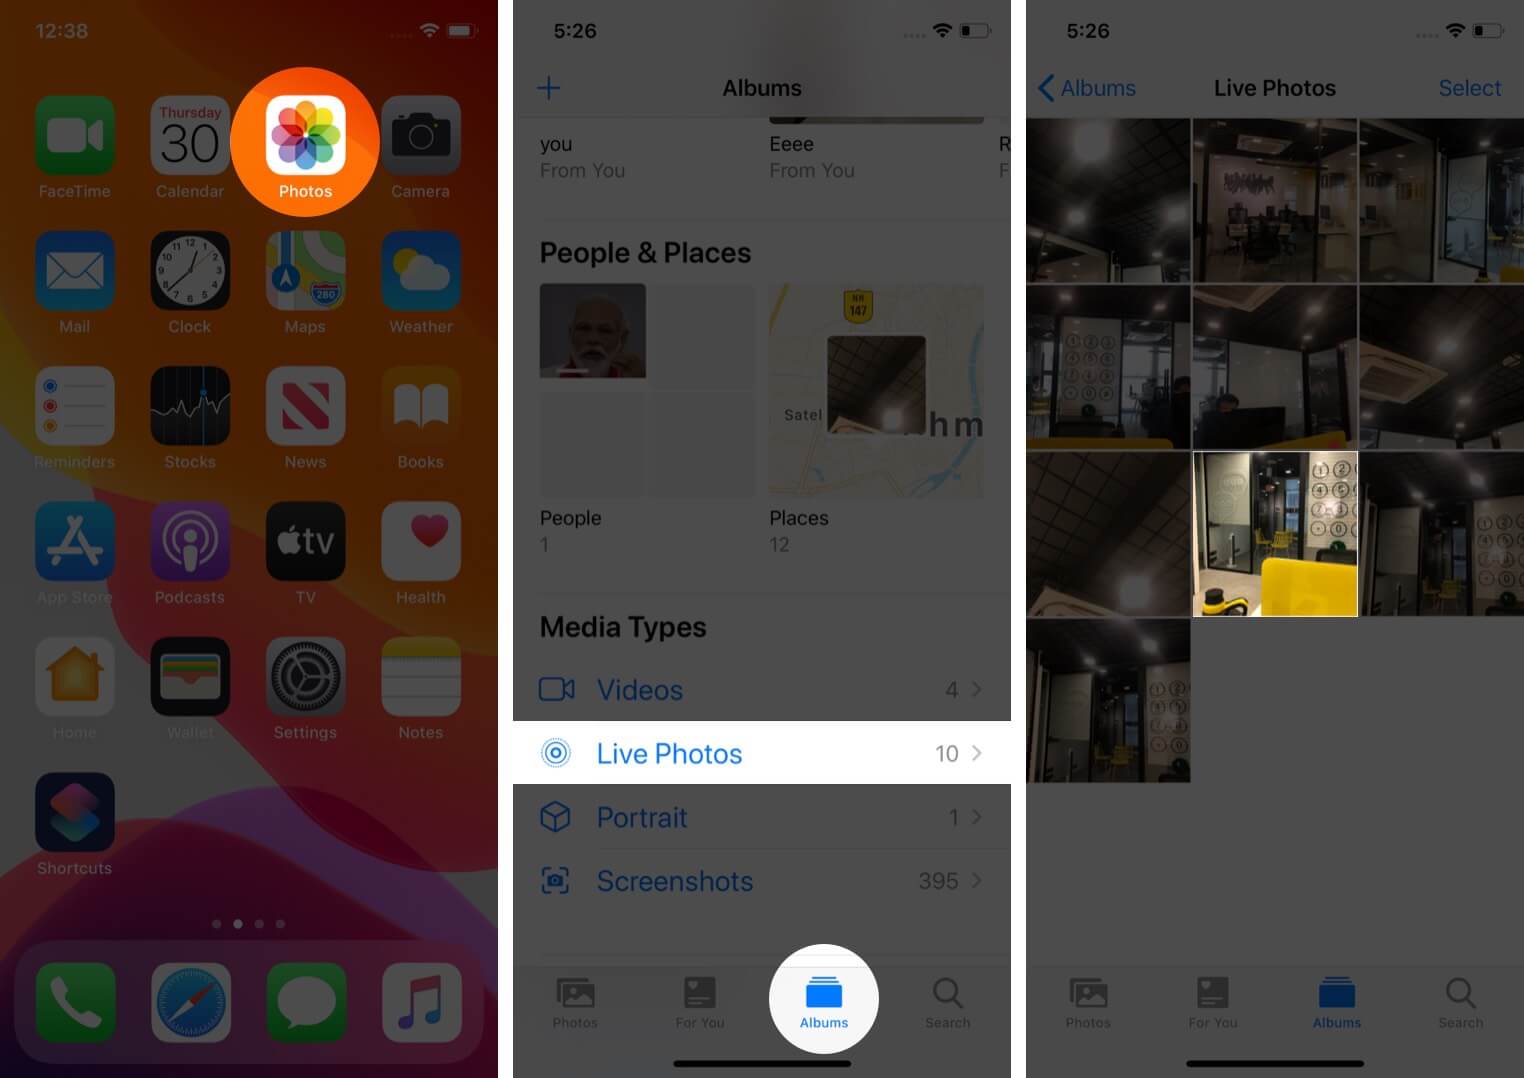 open photos app tap on live photos in albums tab and then tap on live photo on iphone